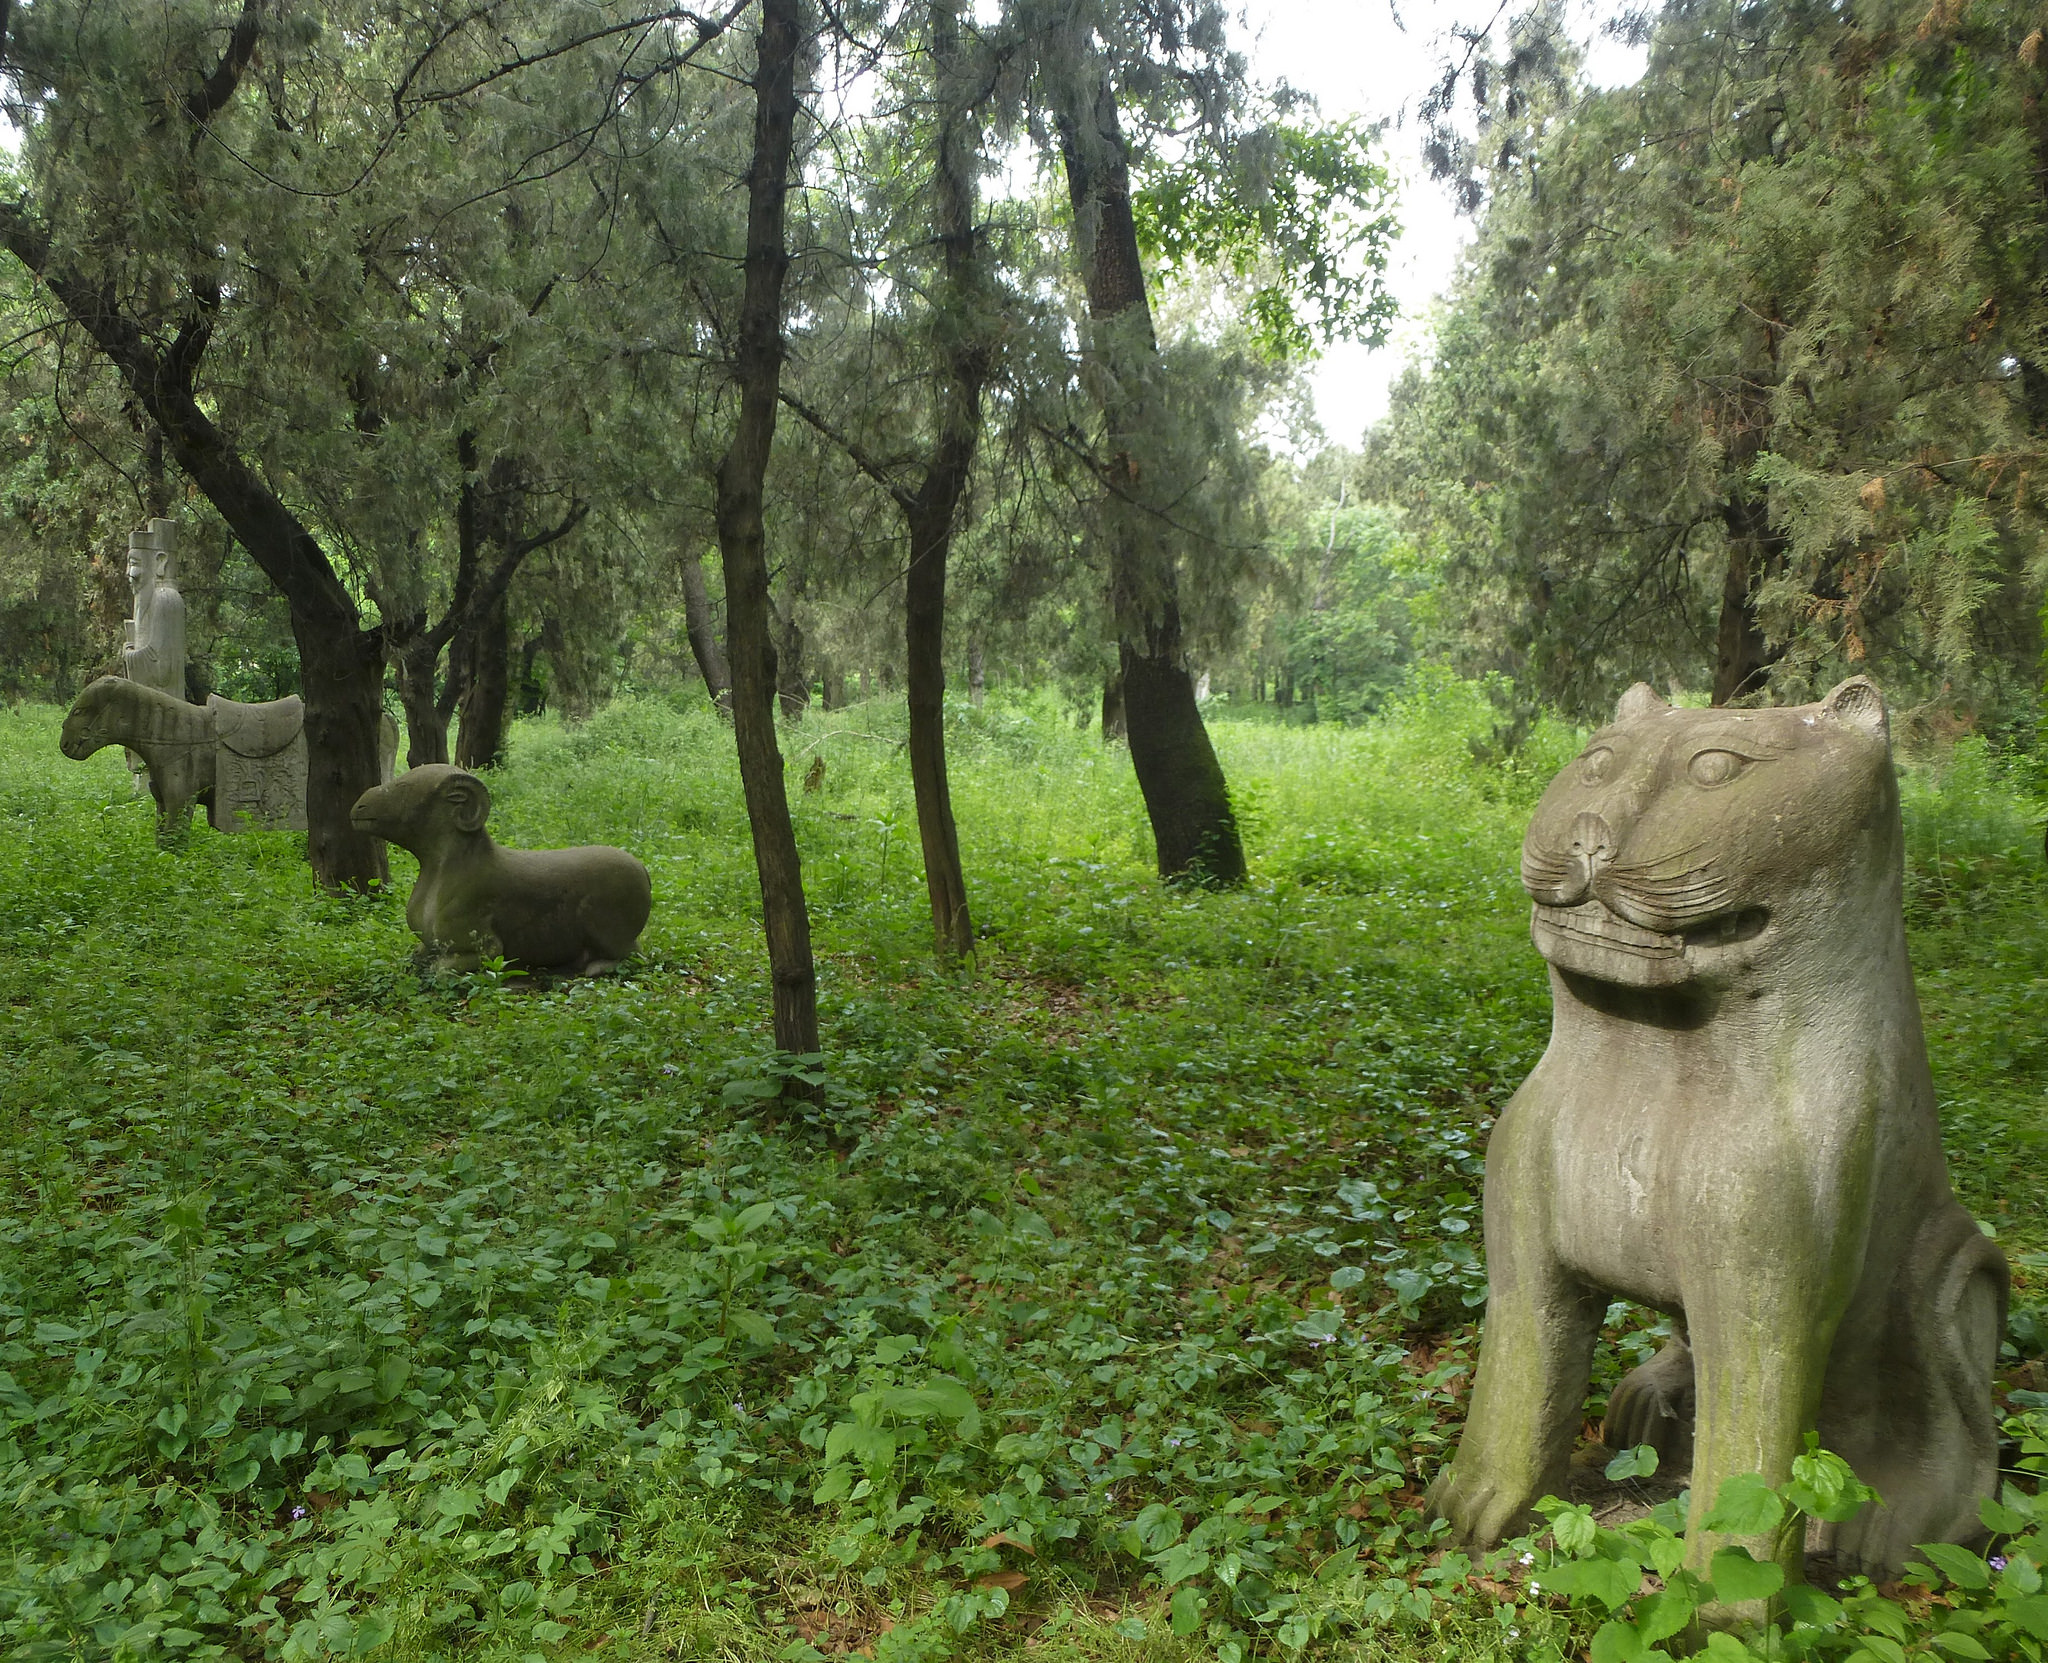 Animal sculptures in Confucius' cemetery in Qufu (photo credit: Jacques Beaulieu, used under CC BY-NC 2.0)